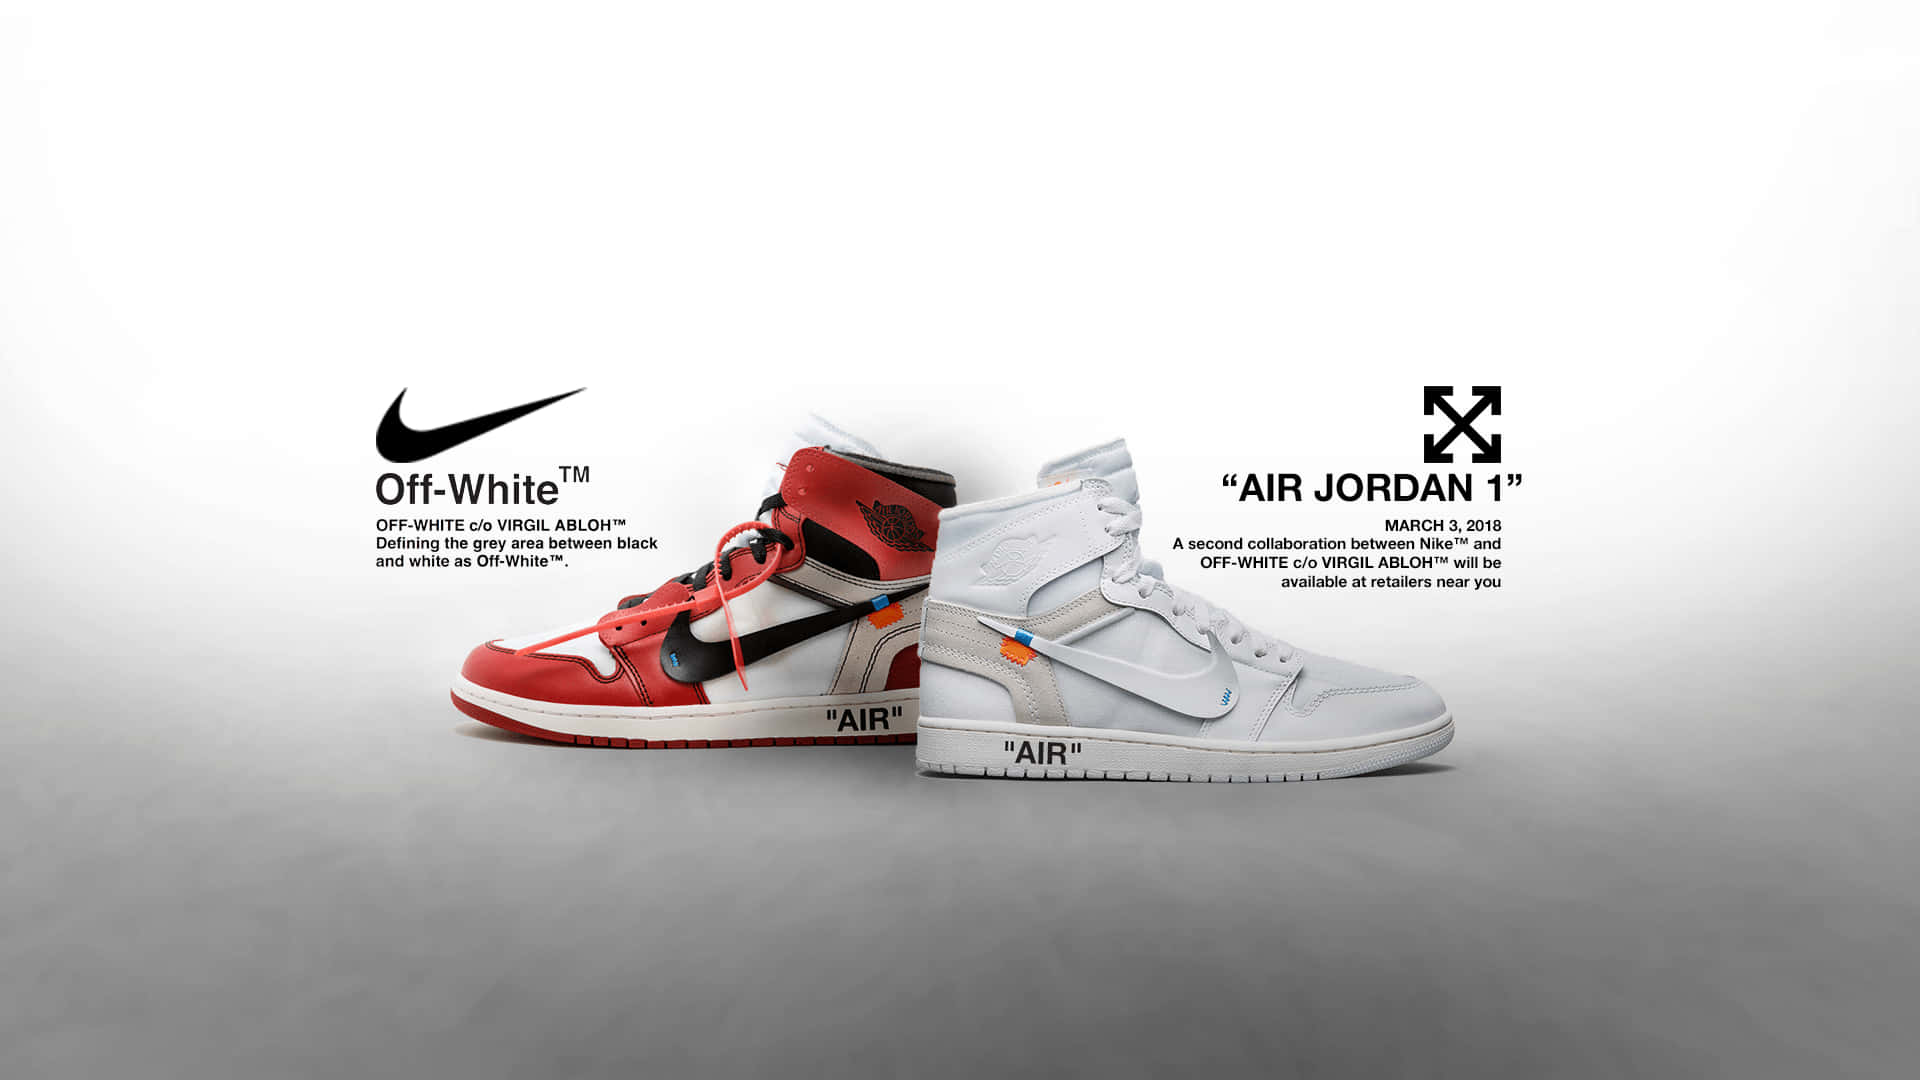 Download Nike Air Force 1 High - Off White Wallpaper